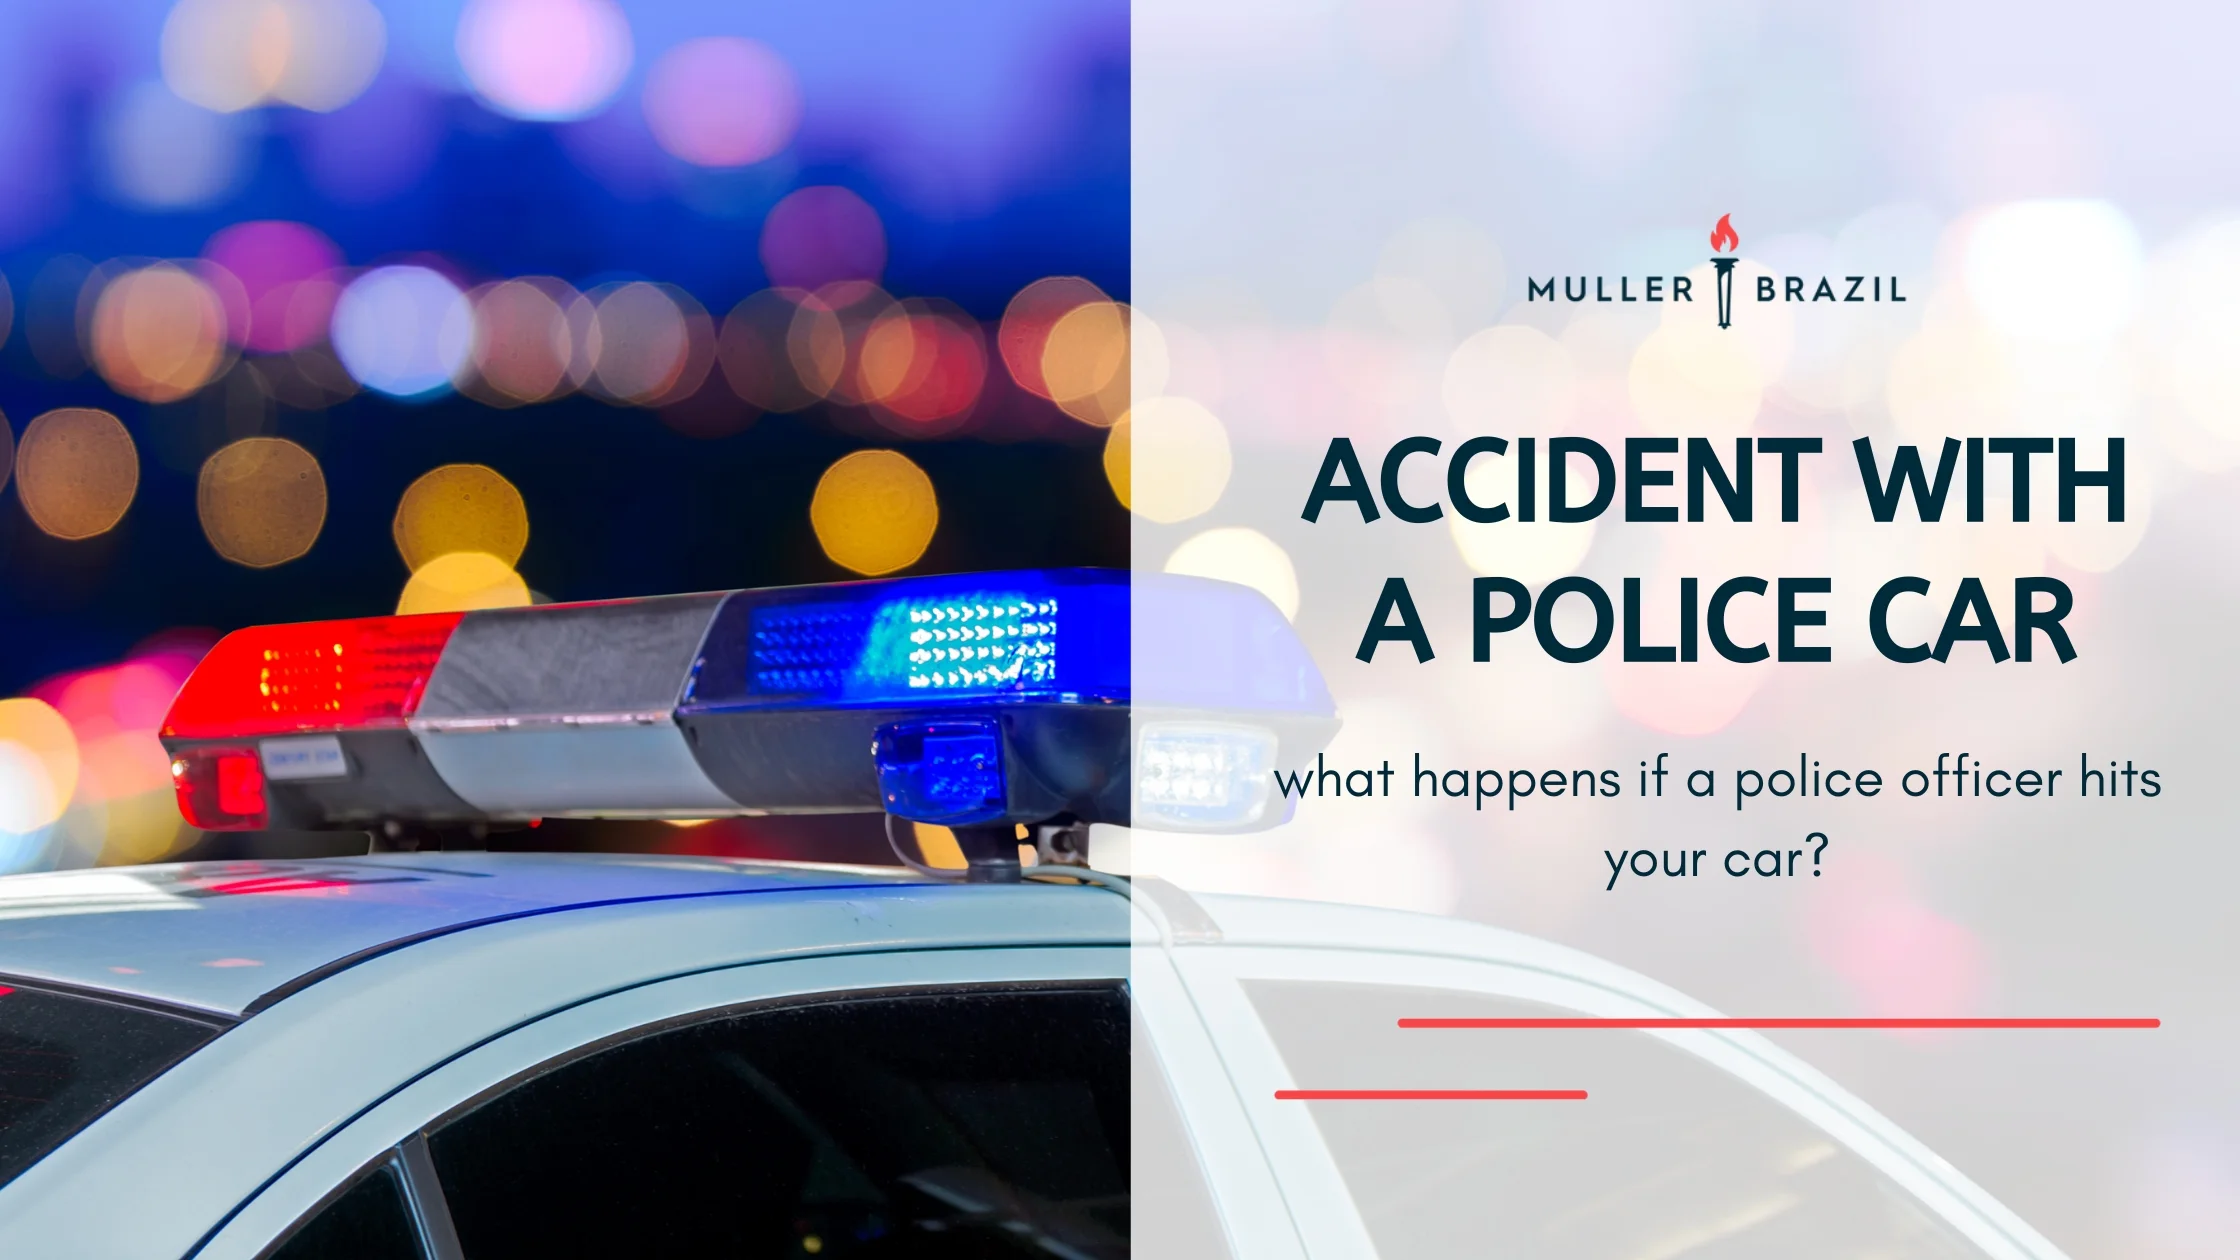 Blog featured image of two black car collision and a caption that says “Accident With a Police Car